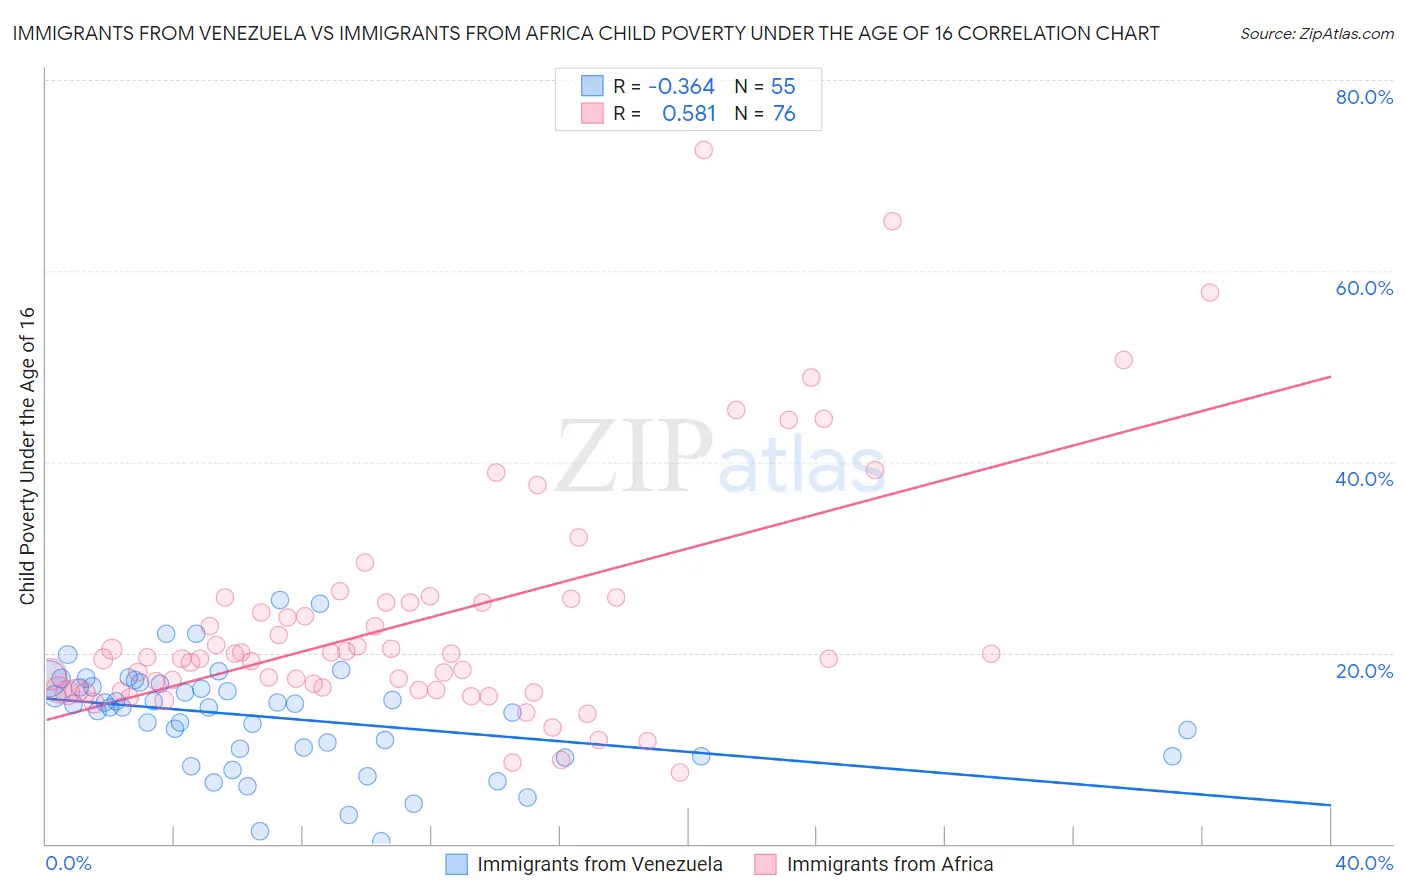 Immigrants from Venezuela vs Immigrants from Africa Child Poverty Under the Age of 16